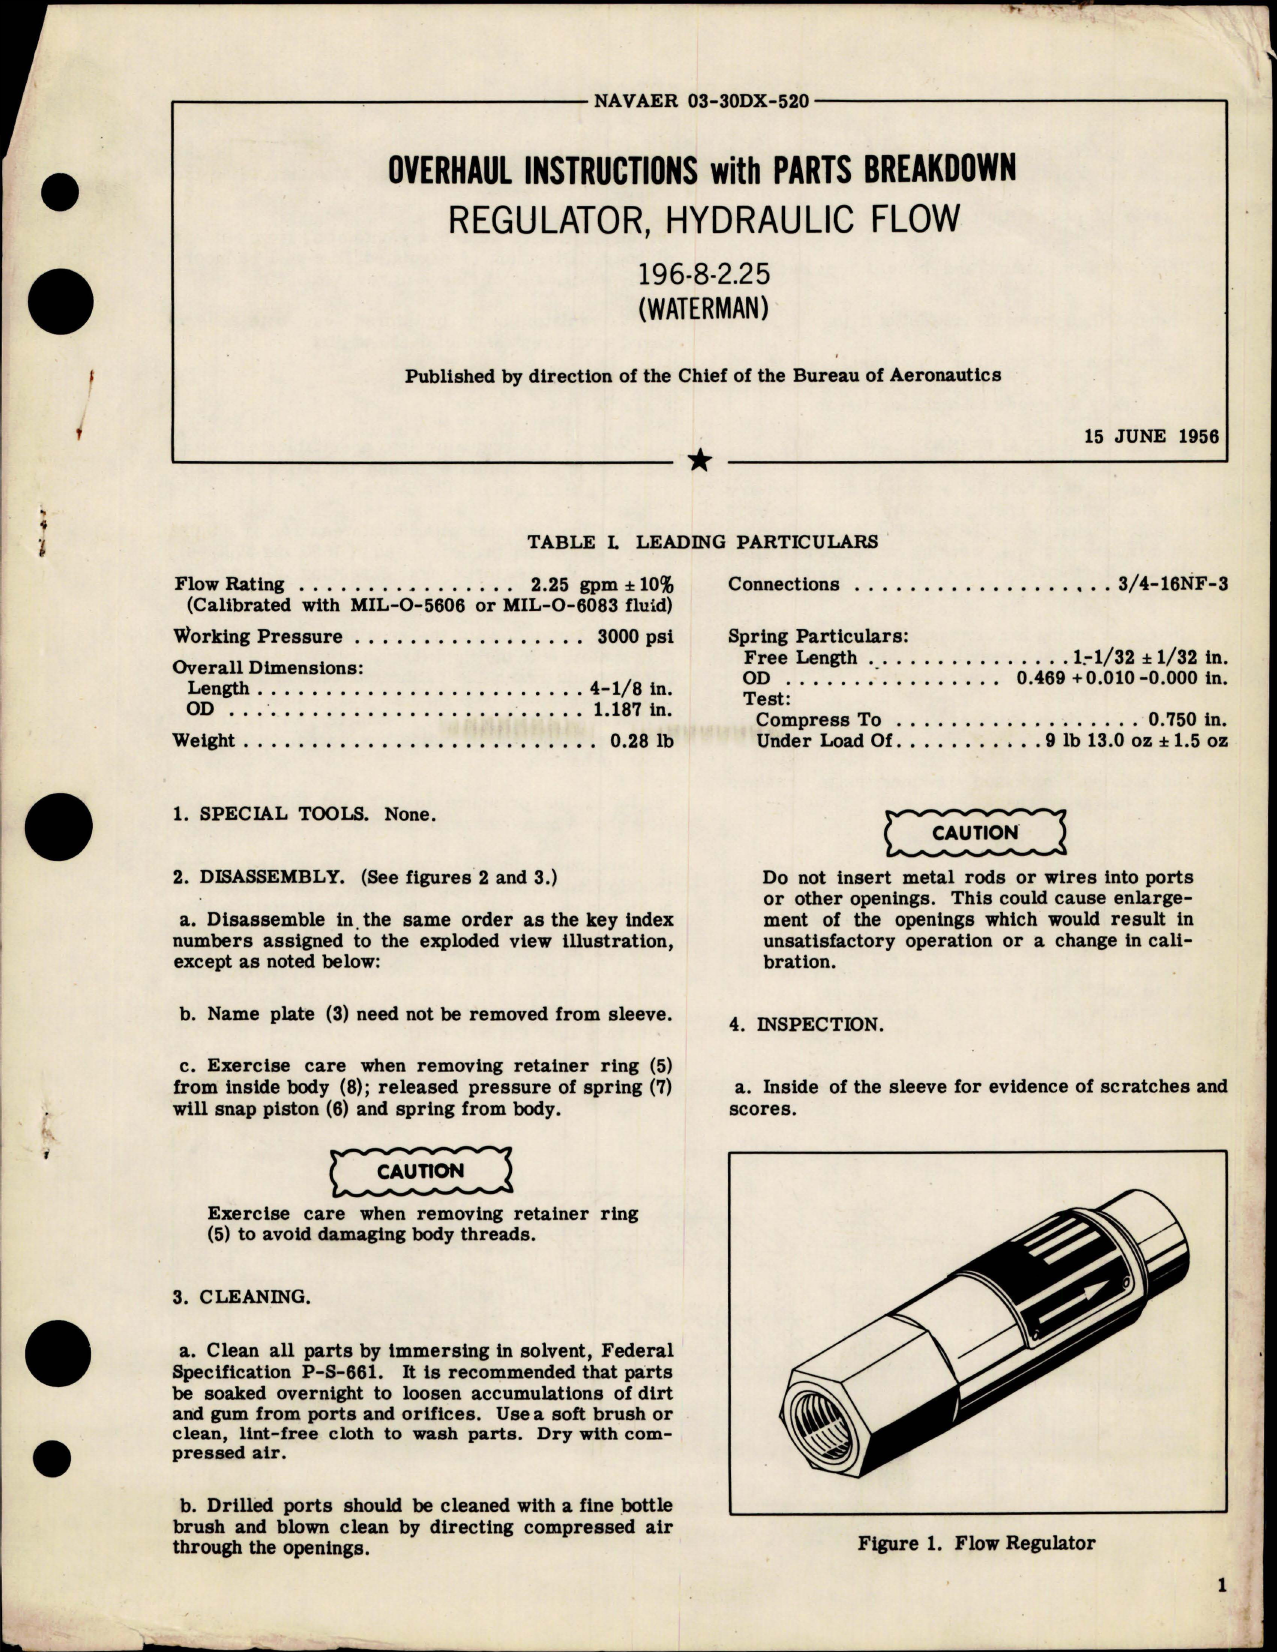 Sample page 1 from AirCorps Library document: Overhaul Instructions with Parts Breakdown for Hydraulic Flow Regulator - 196-8-2.25 